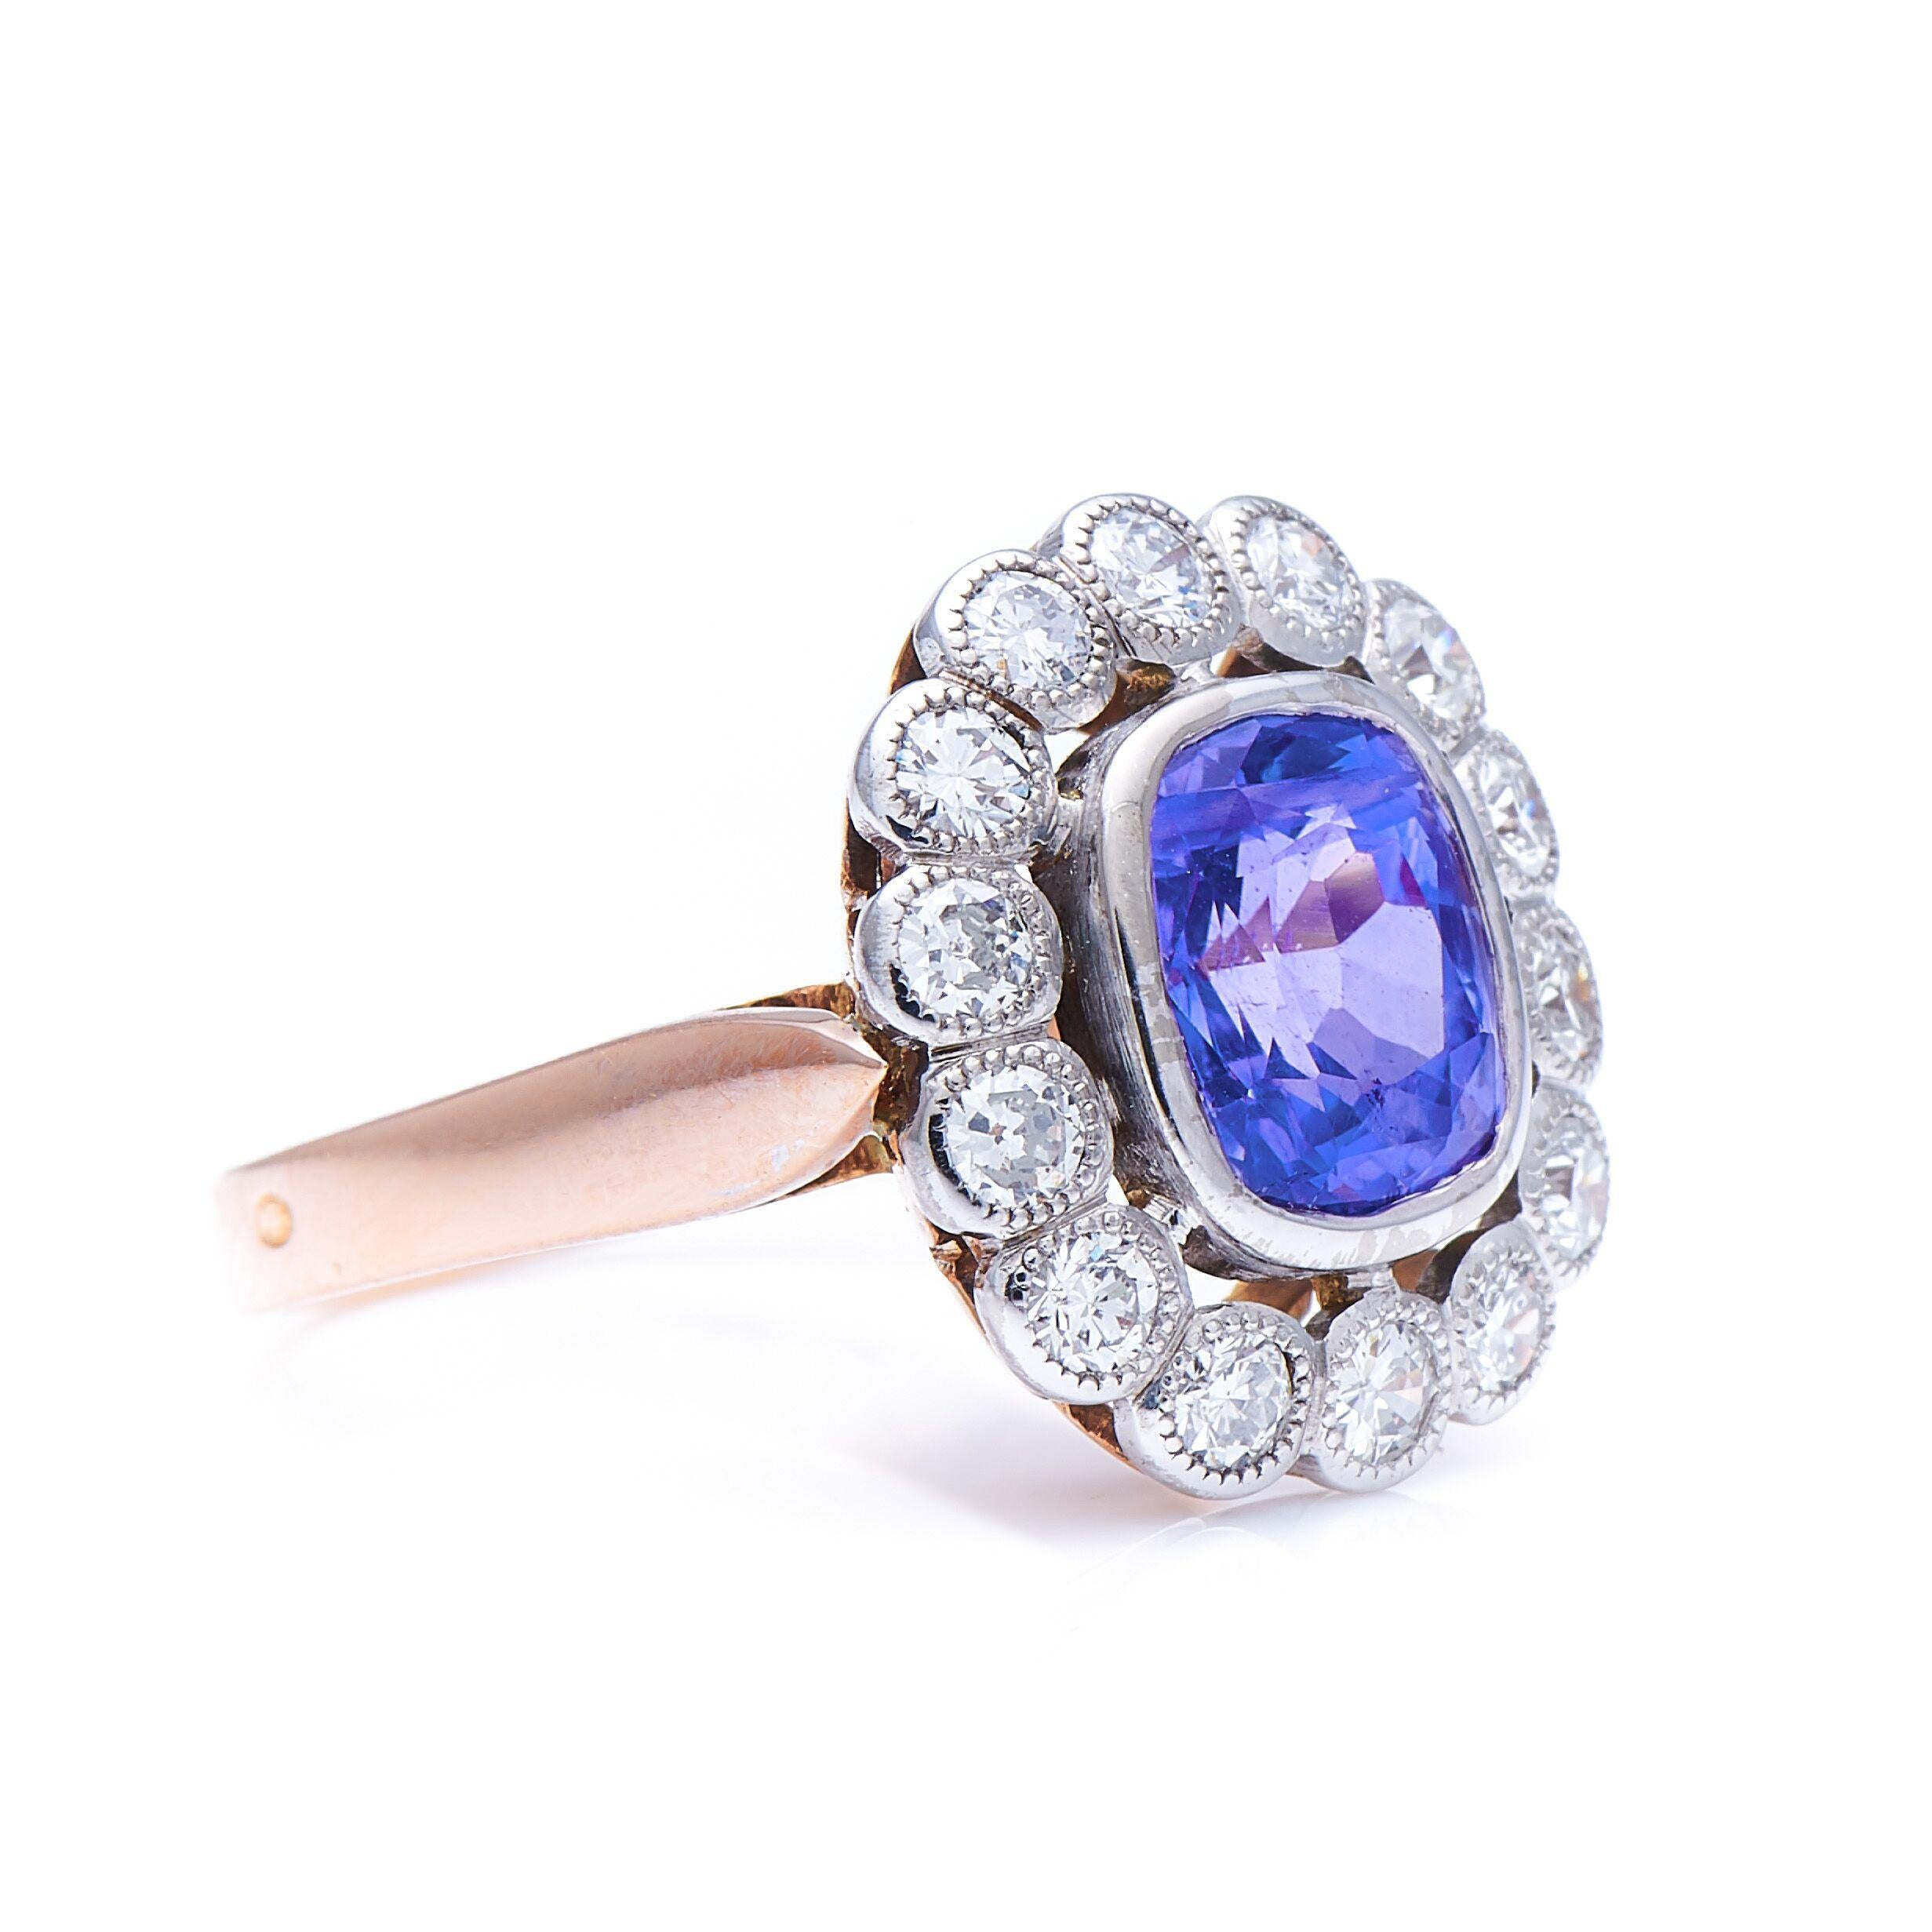 Colour-change sapphire and diamond ring. This unheated Sri Lankan sapphire appears a subtle cornflower blue in daylight, and a soft violet in incandescent light. The reason for this unusual phenomenon is the presence of Chromium in the stone, which